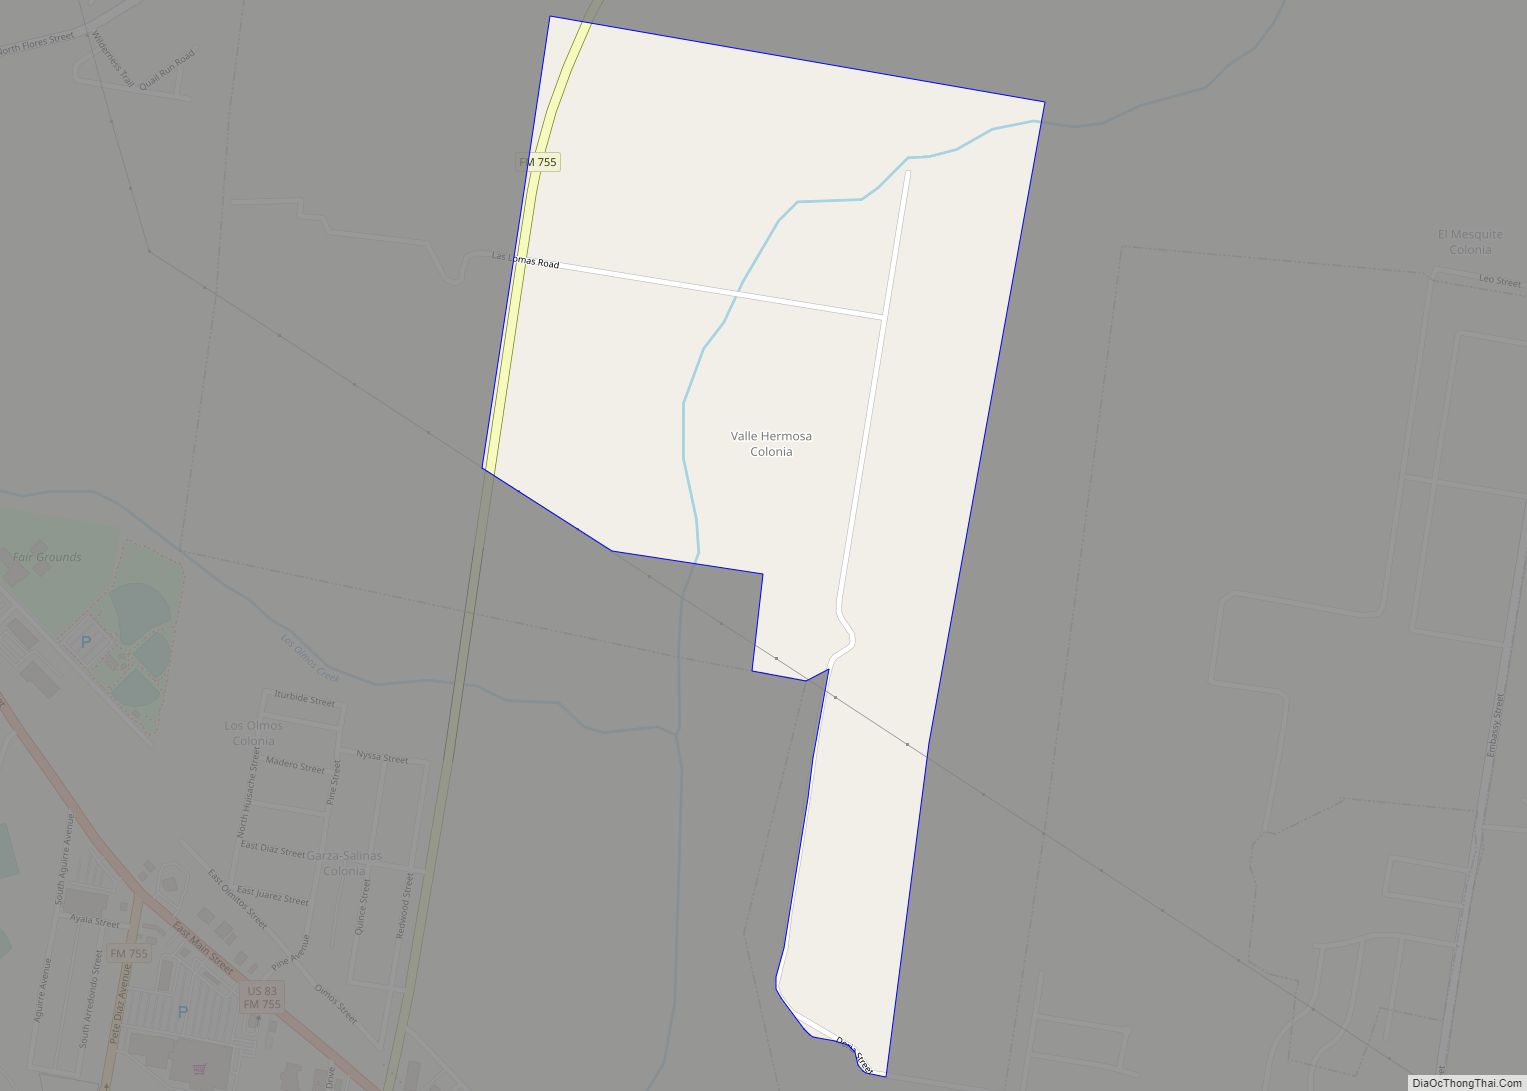 Map of Valle Hermoso CDP